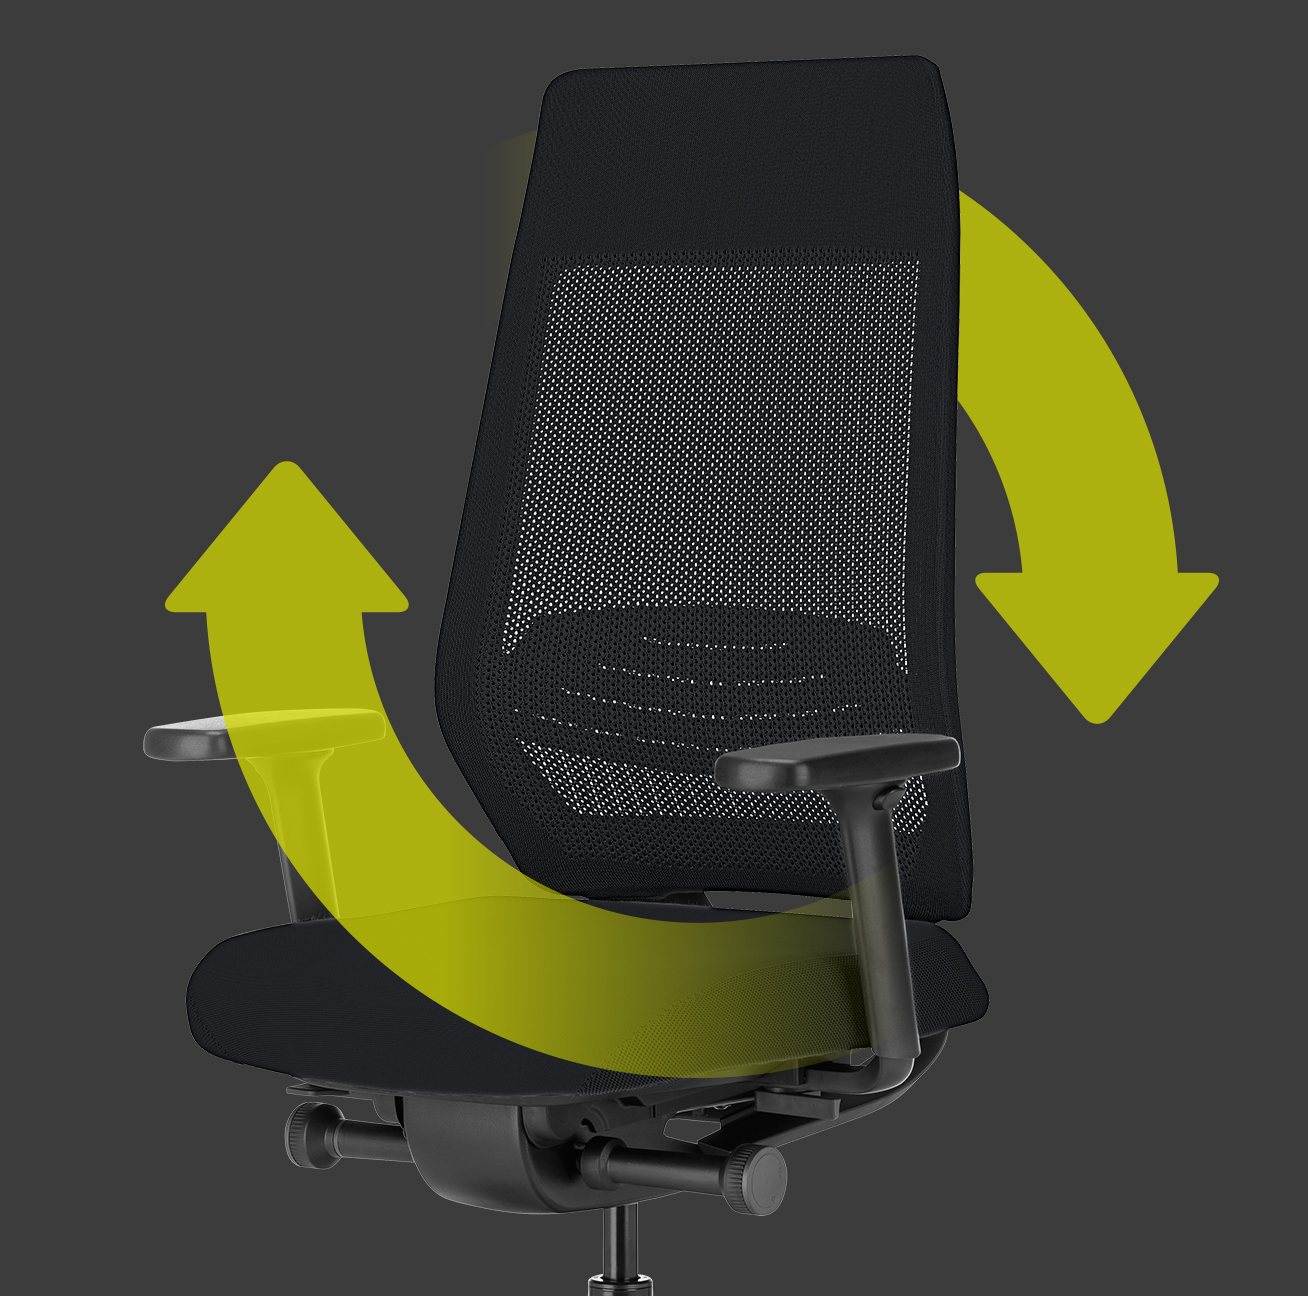 Side view of the ergonomic JOYCE swivel chair with black mesh backrest, black seat cover, black T-armrests and plastic parts in black (including base, column) with two green arrows forming a circle around the chair. This indicates the sustainability and reusability of the chair | by Daniel Figueroa